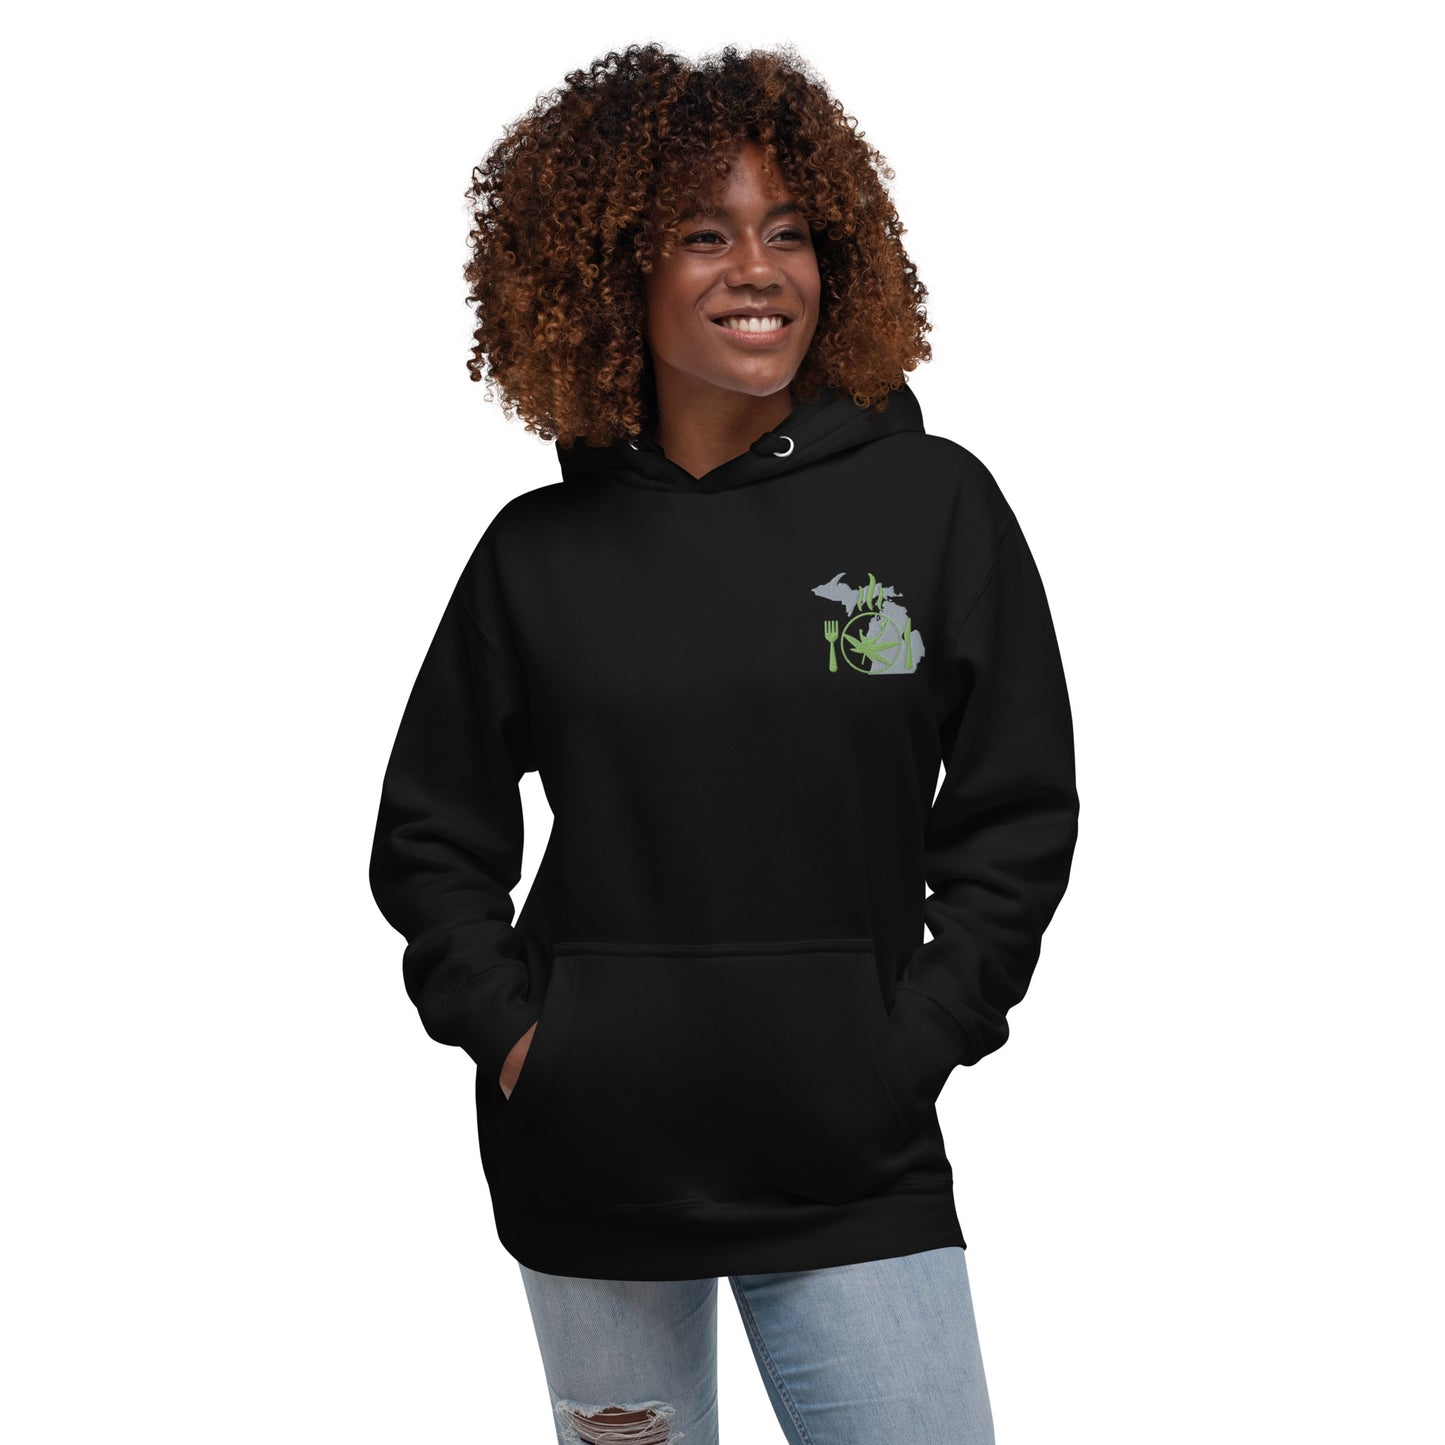 Michigan Edible Embroidered Unisex Hoodie | michigan-edible-embroidered-unisex-hoodie | Sweatshirt | Michigan Edibles